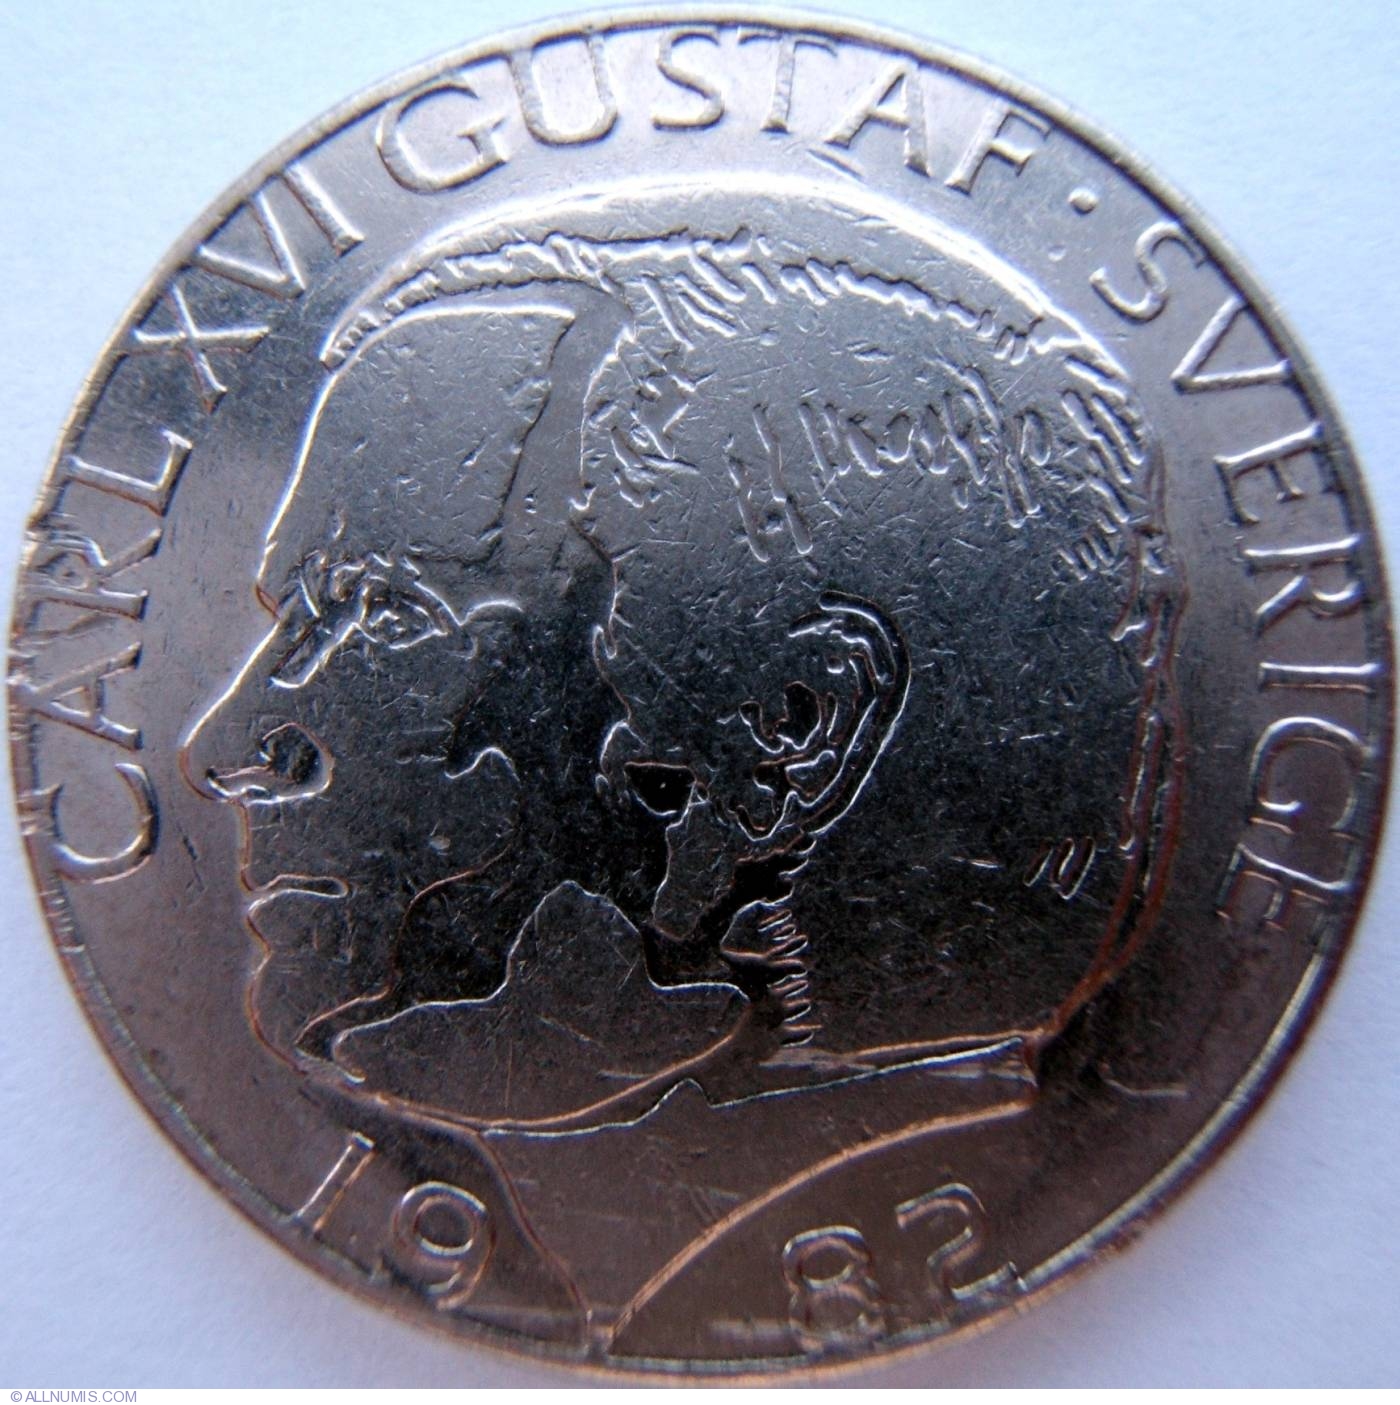 Coin of 1 Krona 1982 from Sweden - ID 3717